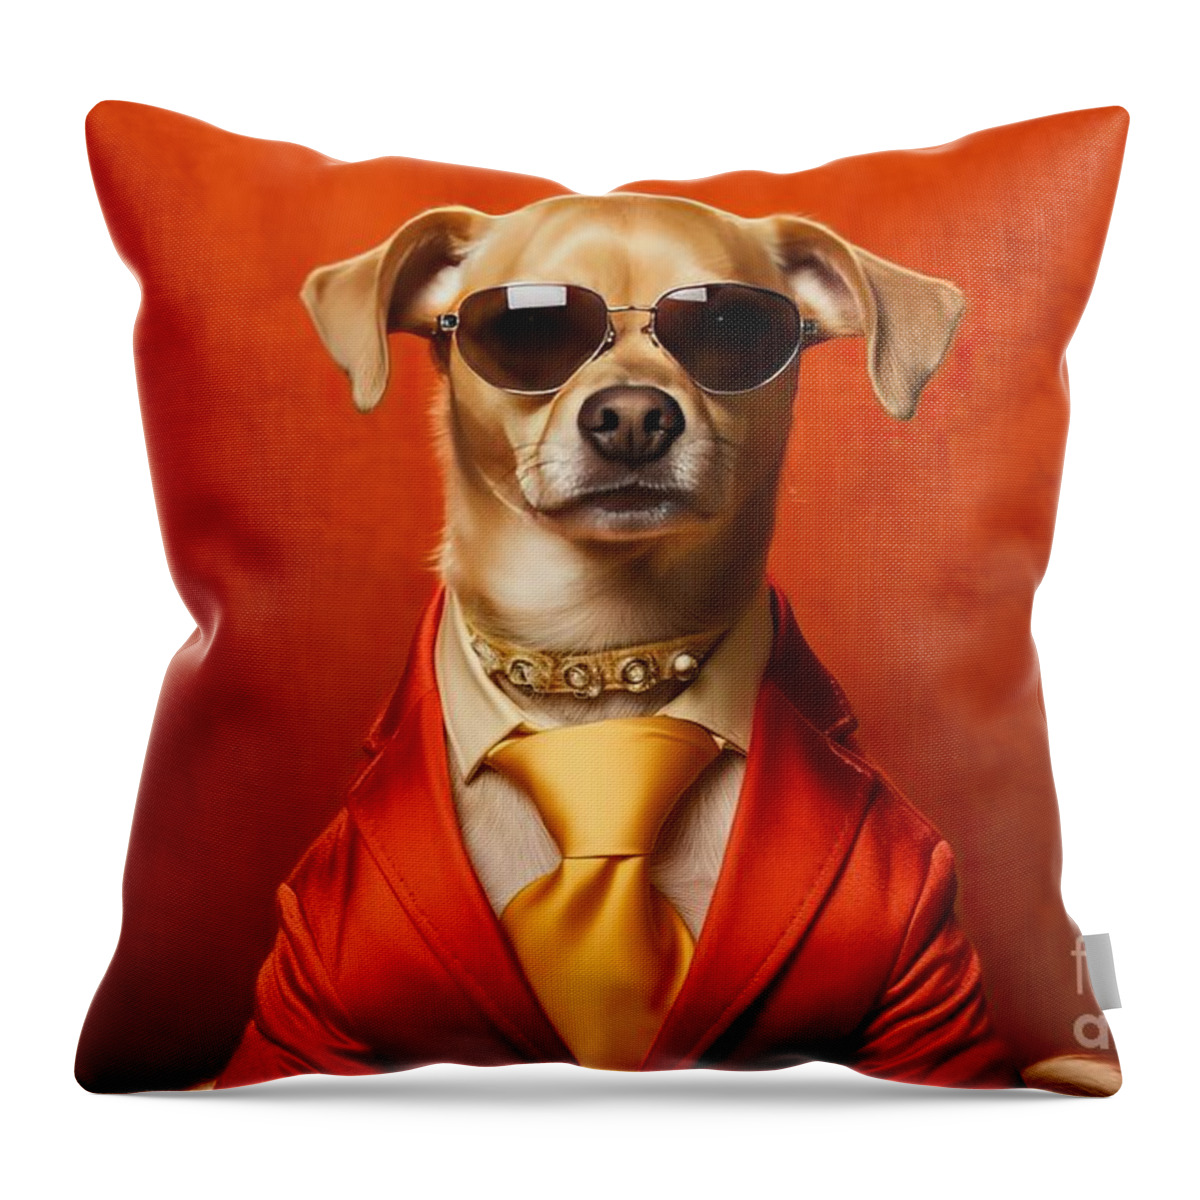 Dog Throw Pillow featuring the painting Art Celebrity Famous Were It If Poses Striking Sunglasses Attire Glamorous Dog Fashionable Funny Glamourous Glamour Humor Animal Cute Fashion Pet Puppy Canino Studio White Style Domestic Indoor by N Akkash